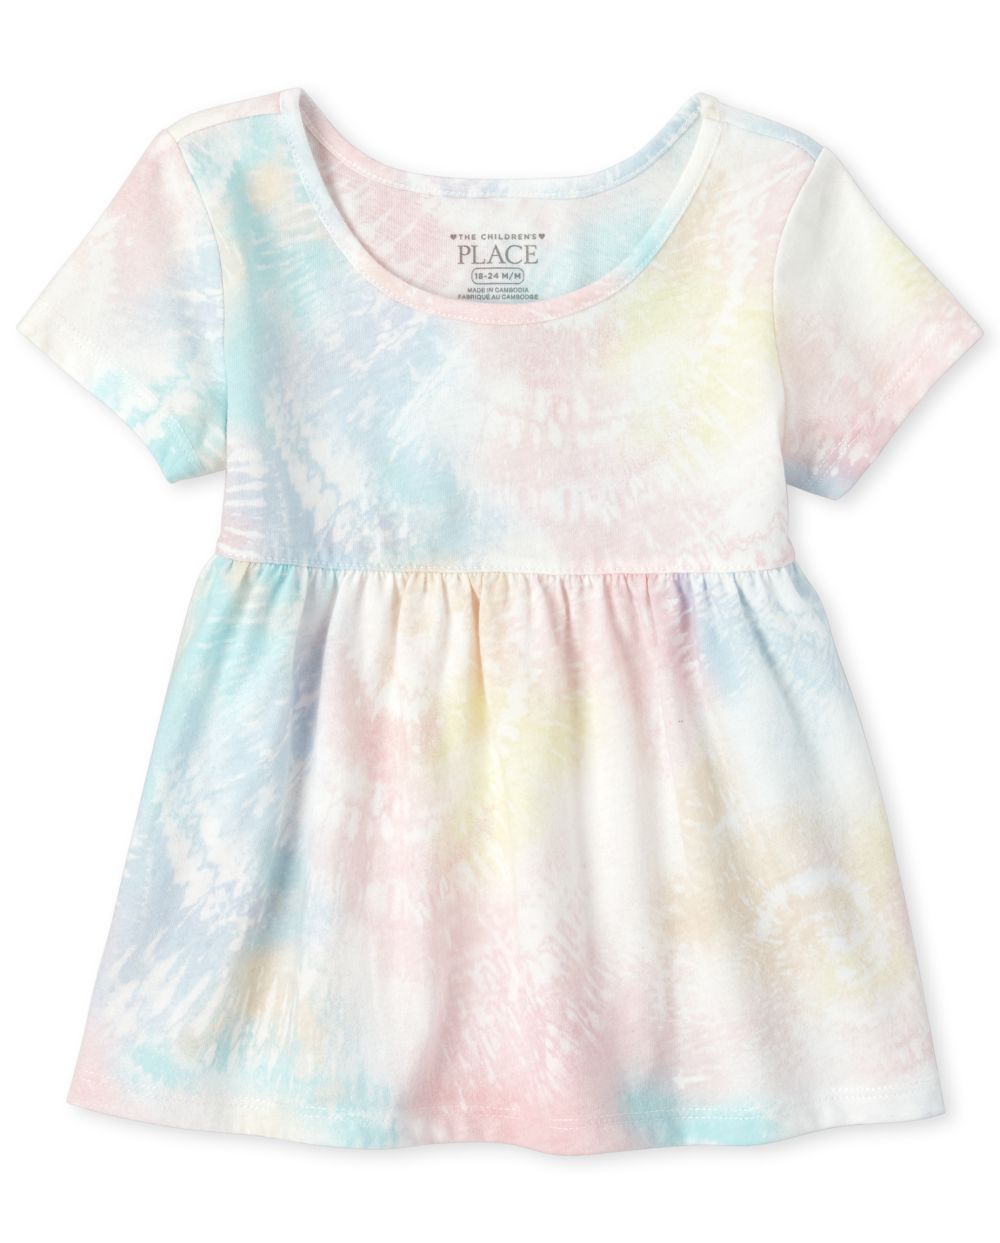 Baby And Toddler Girls Short Sleeve Tie Dye Tunic Top